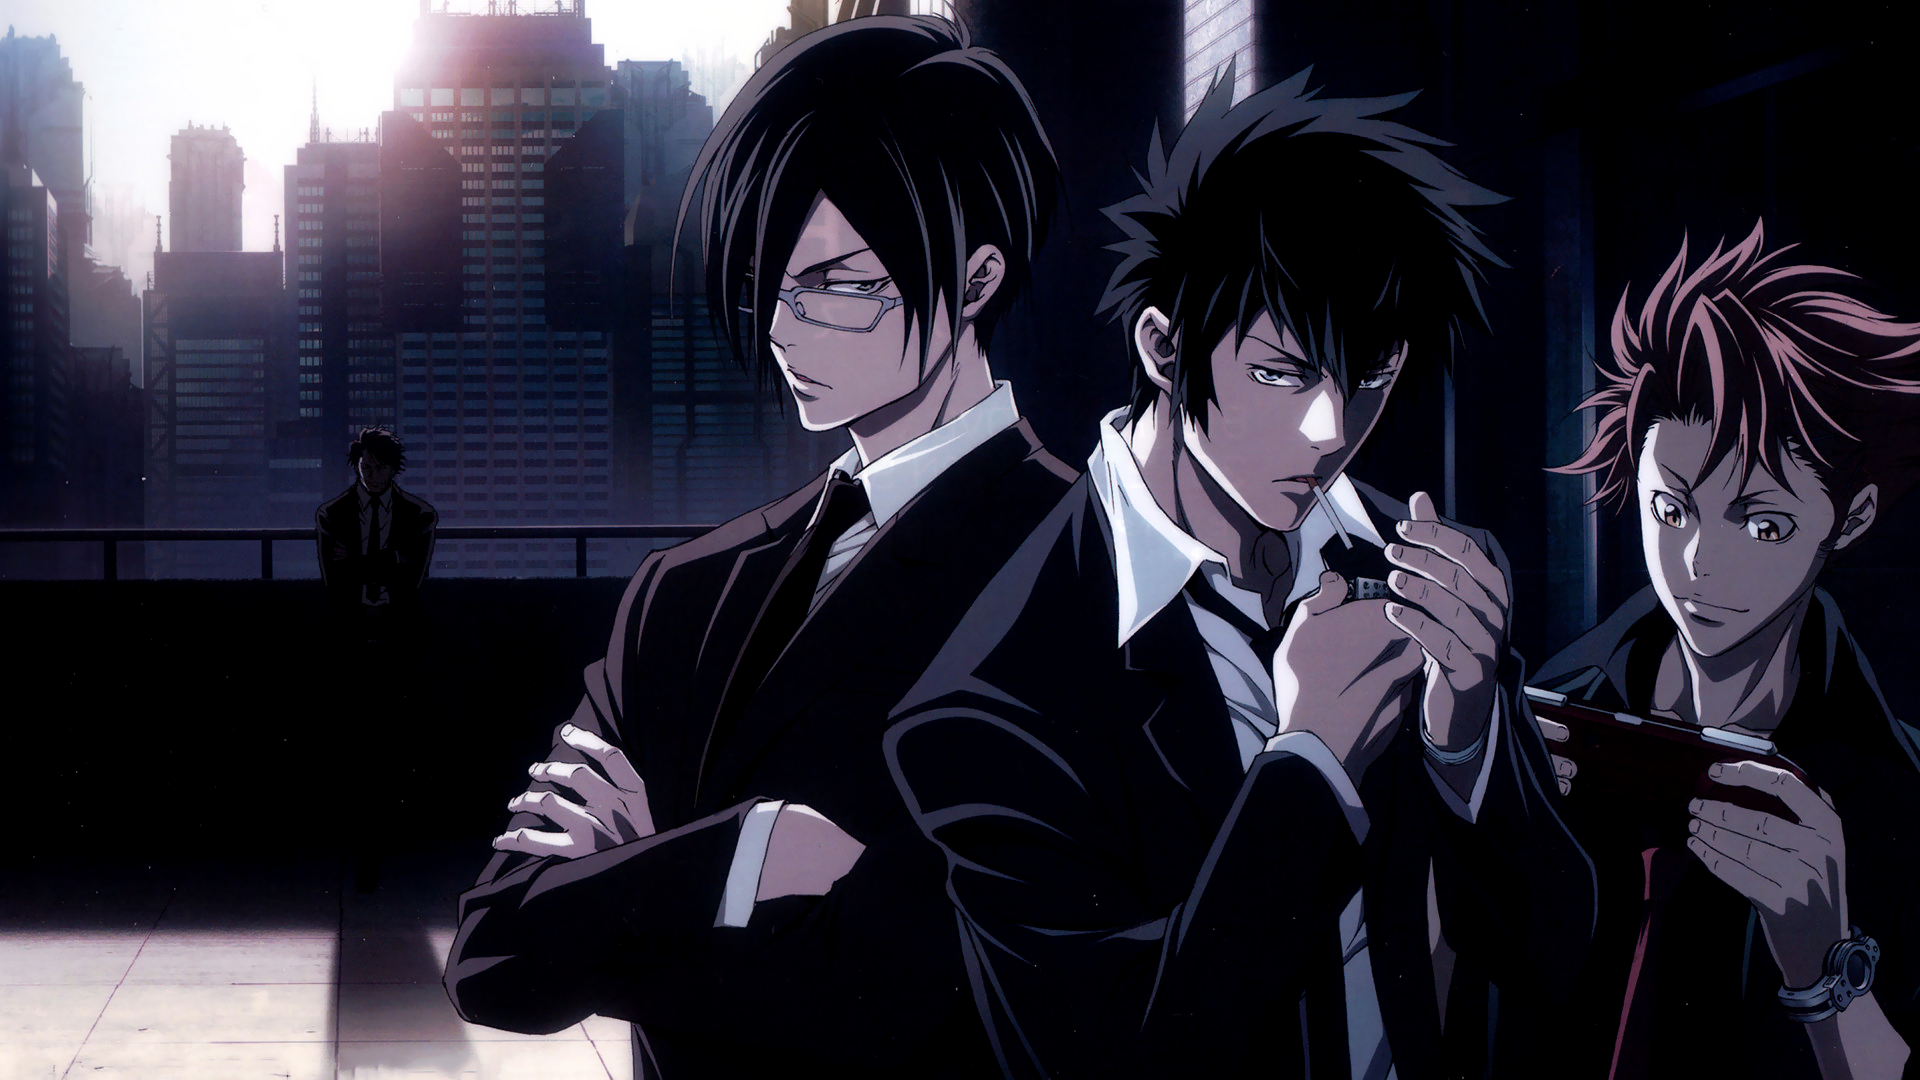 Anime Psycho-Pass HD Wallpaper | Background Image